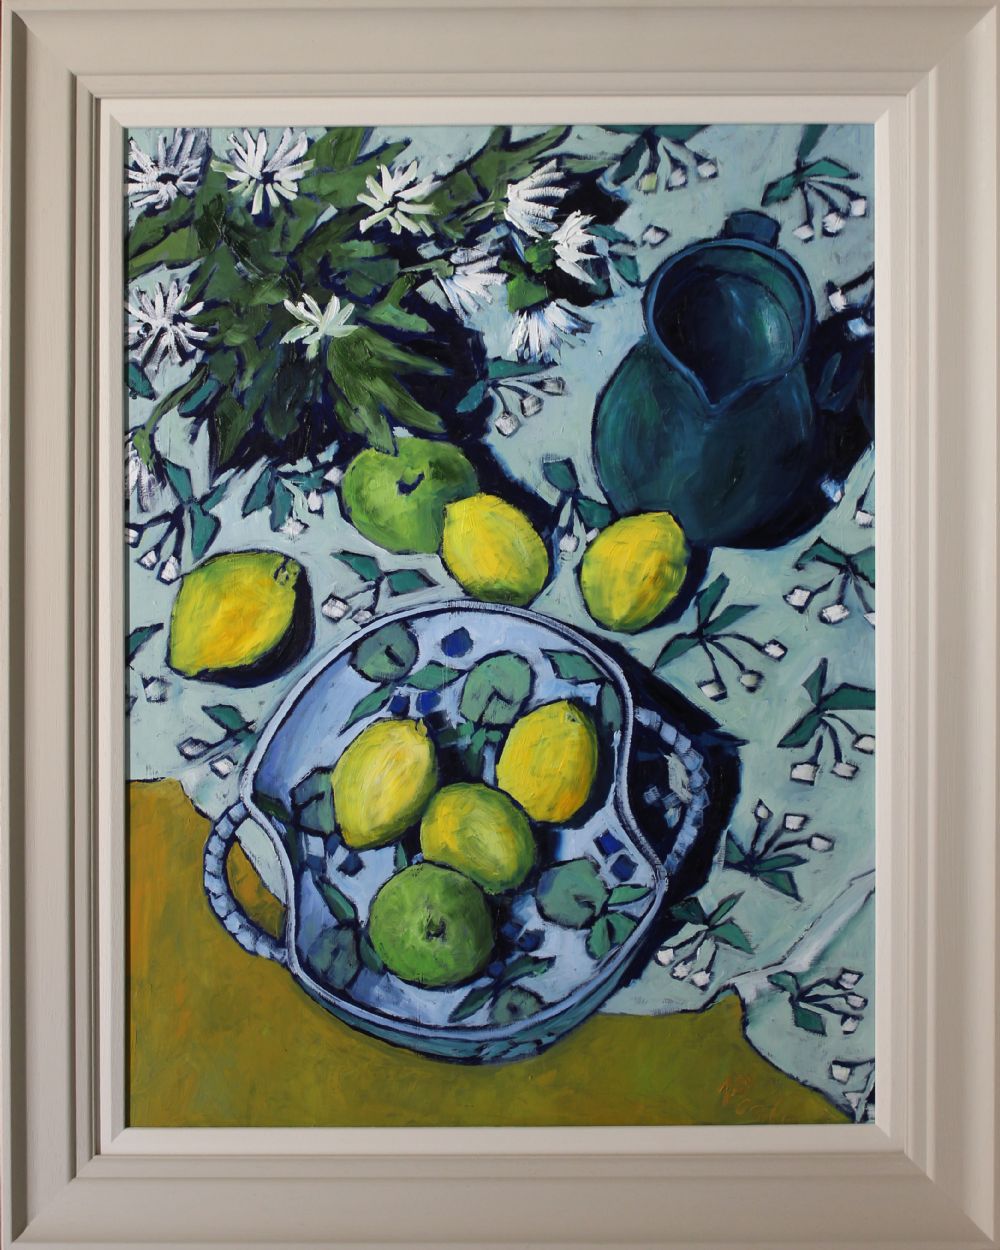 LEMONS ON ITALIAN CLOTH by Patrick Viale  at deVeres Auctions